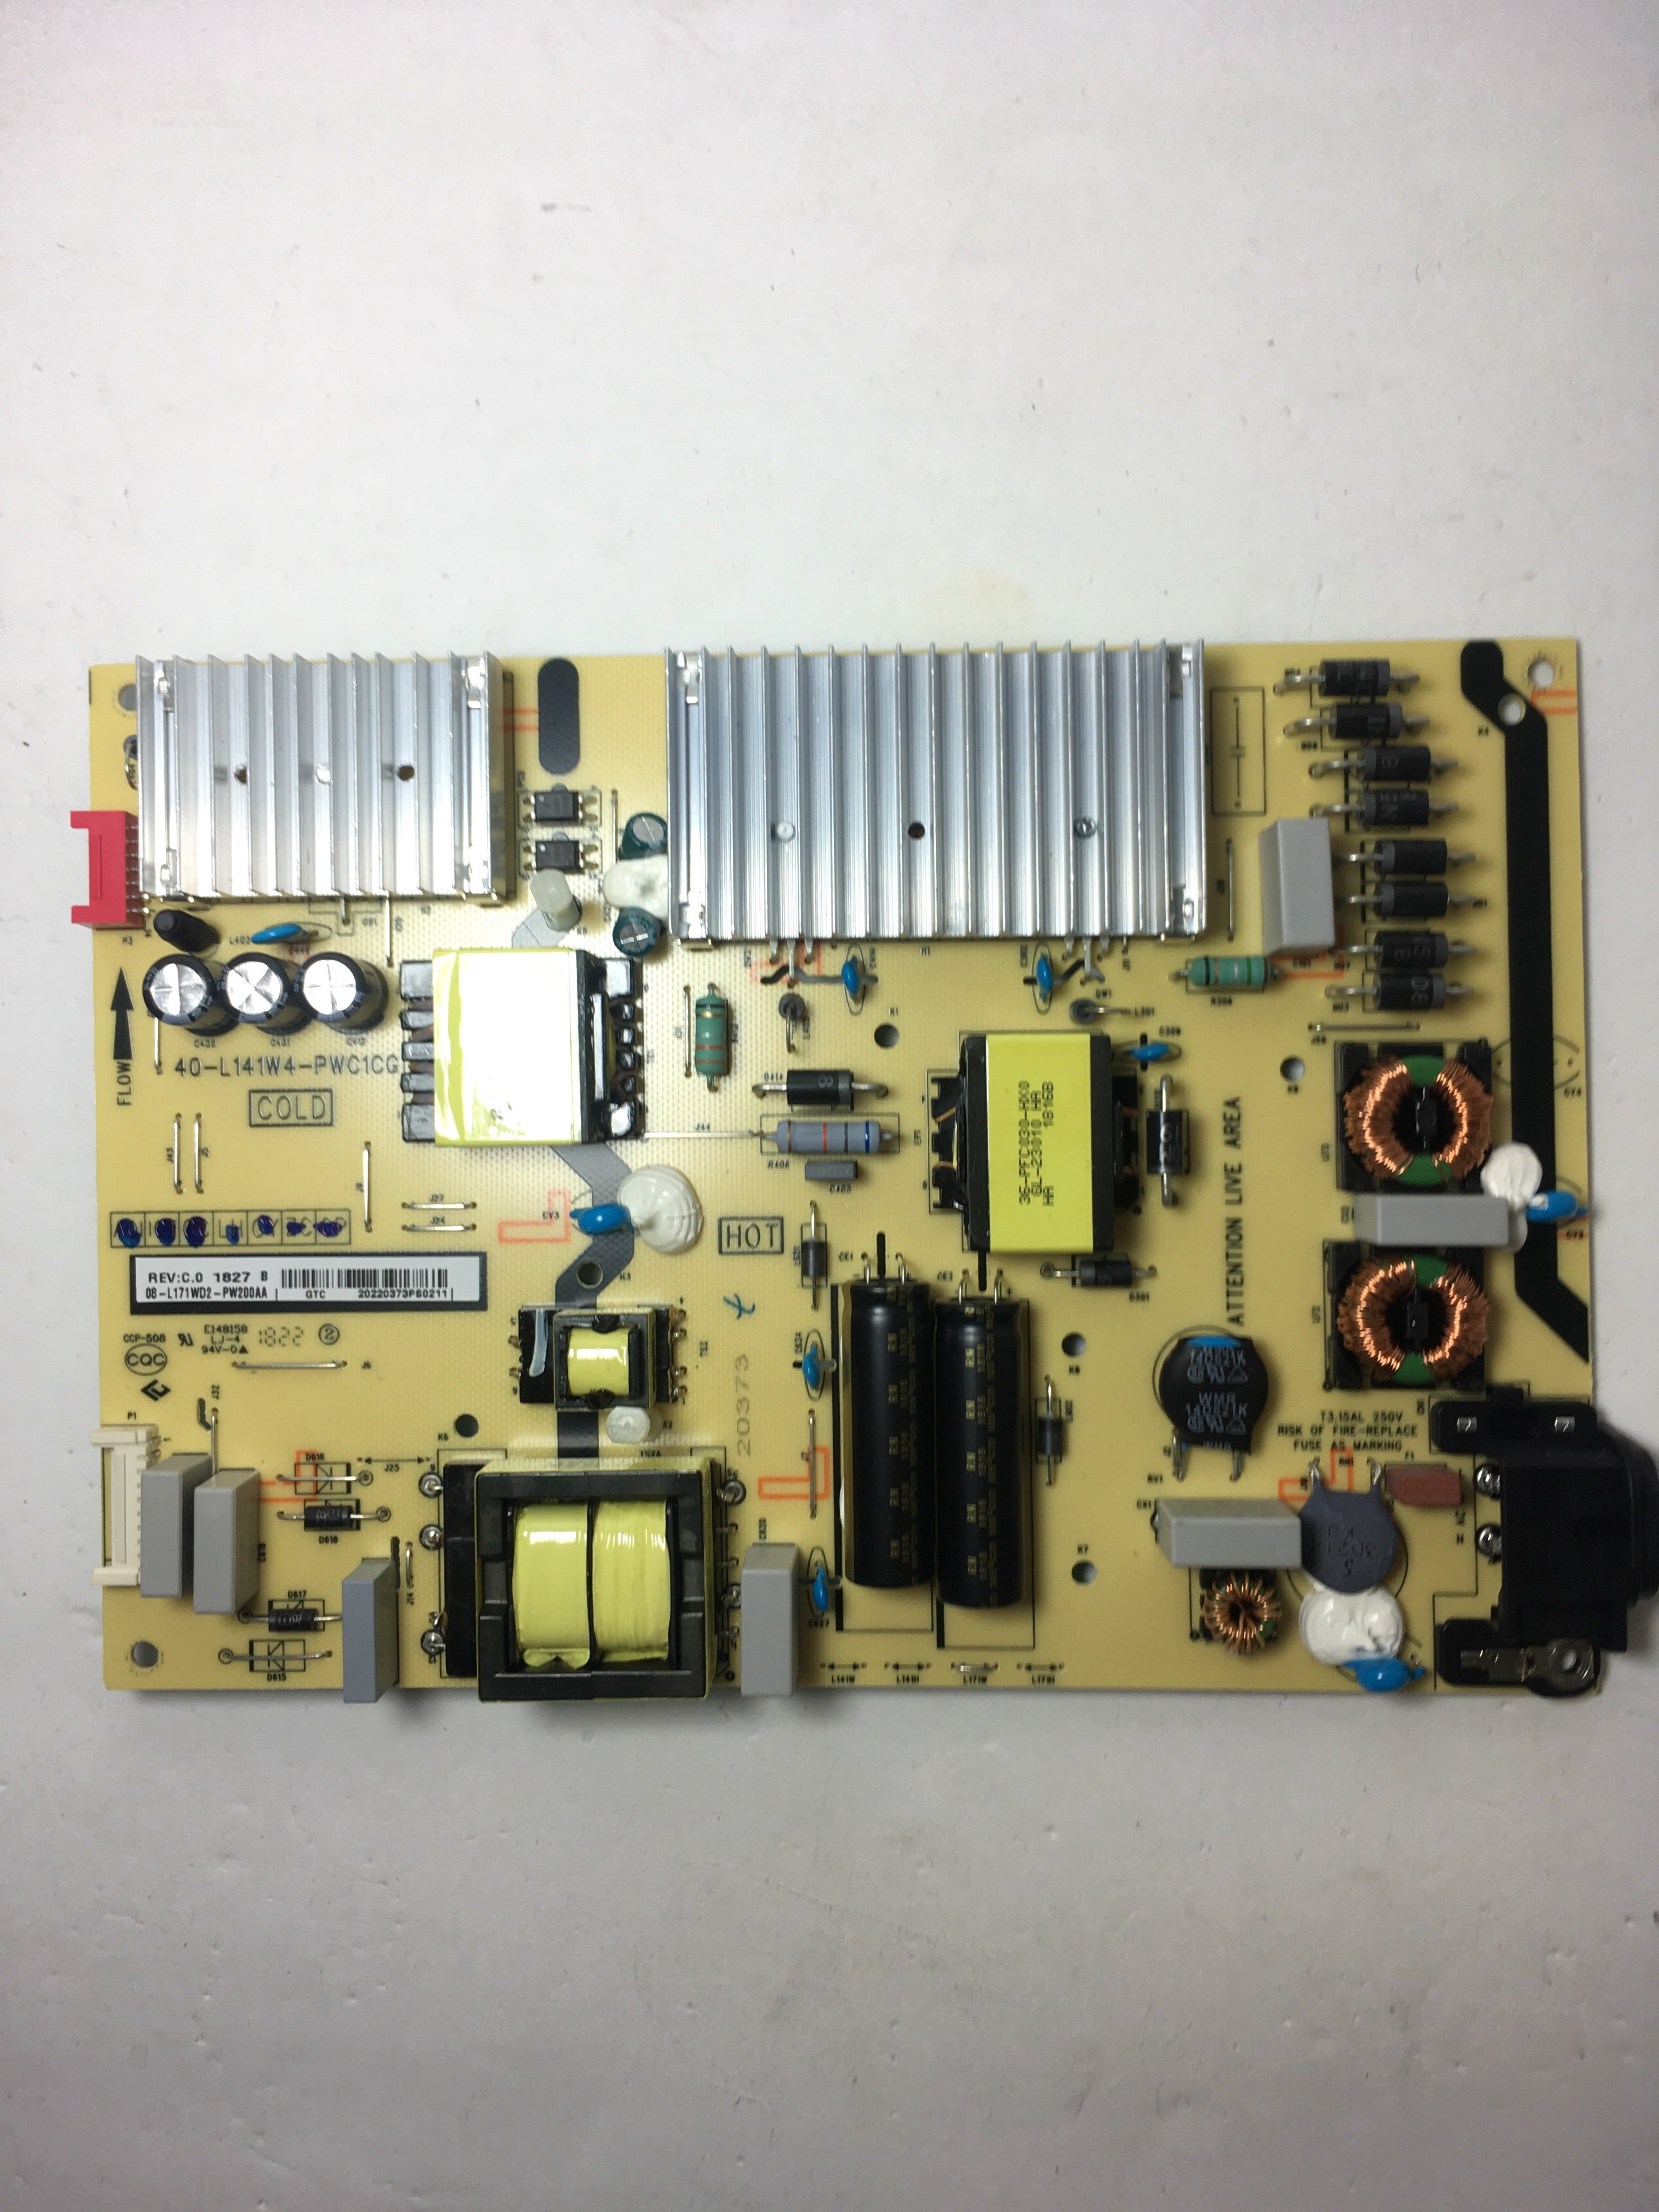 TCL 08-L171WD2-PW200AA Power Supply Board